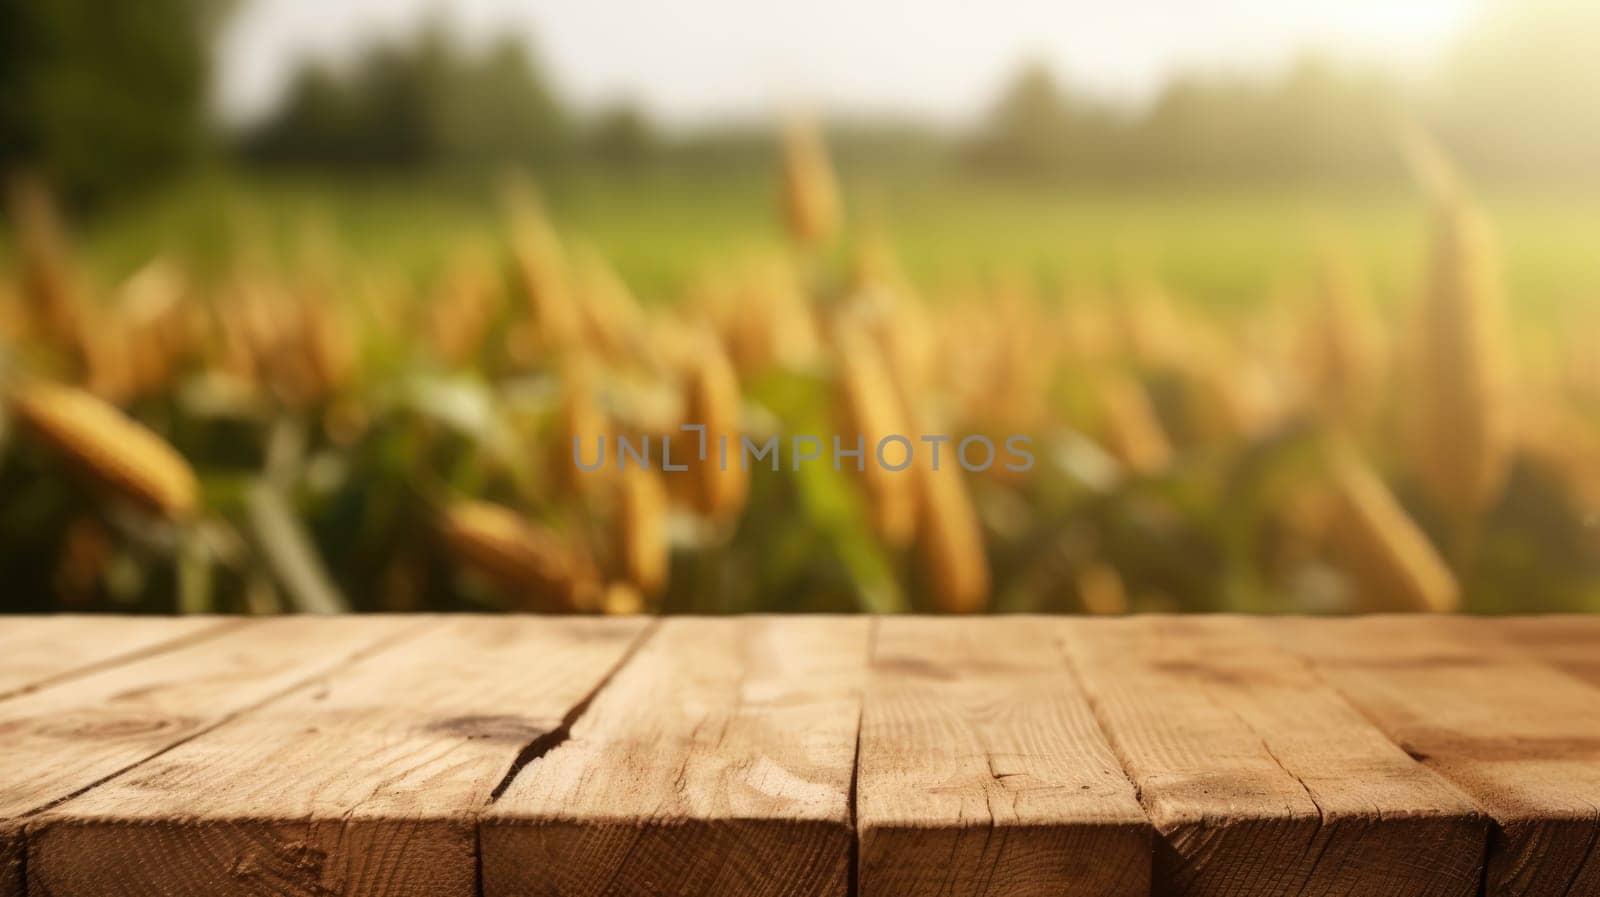 The empty wooden brown table top with blur background of corn field. Exuberant image.